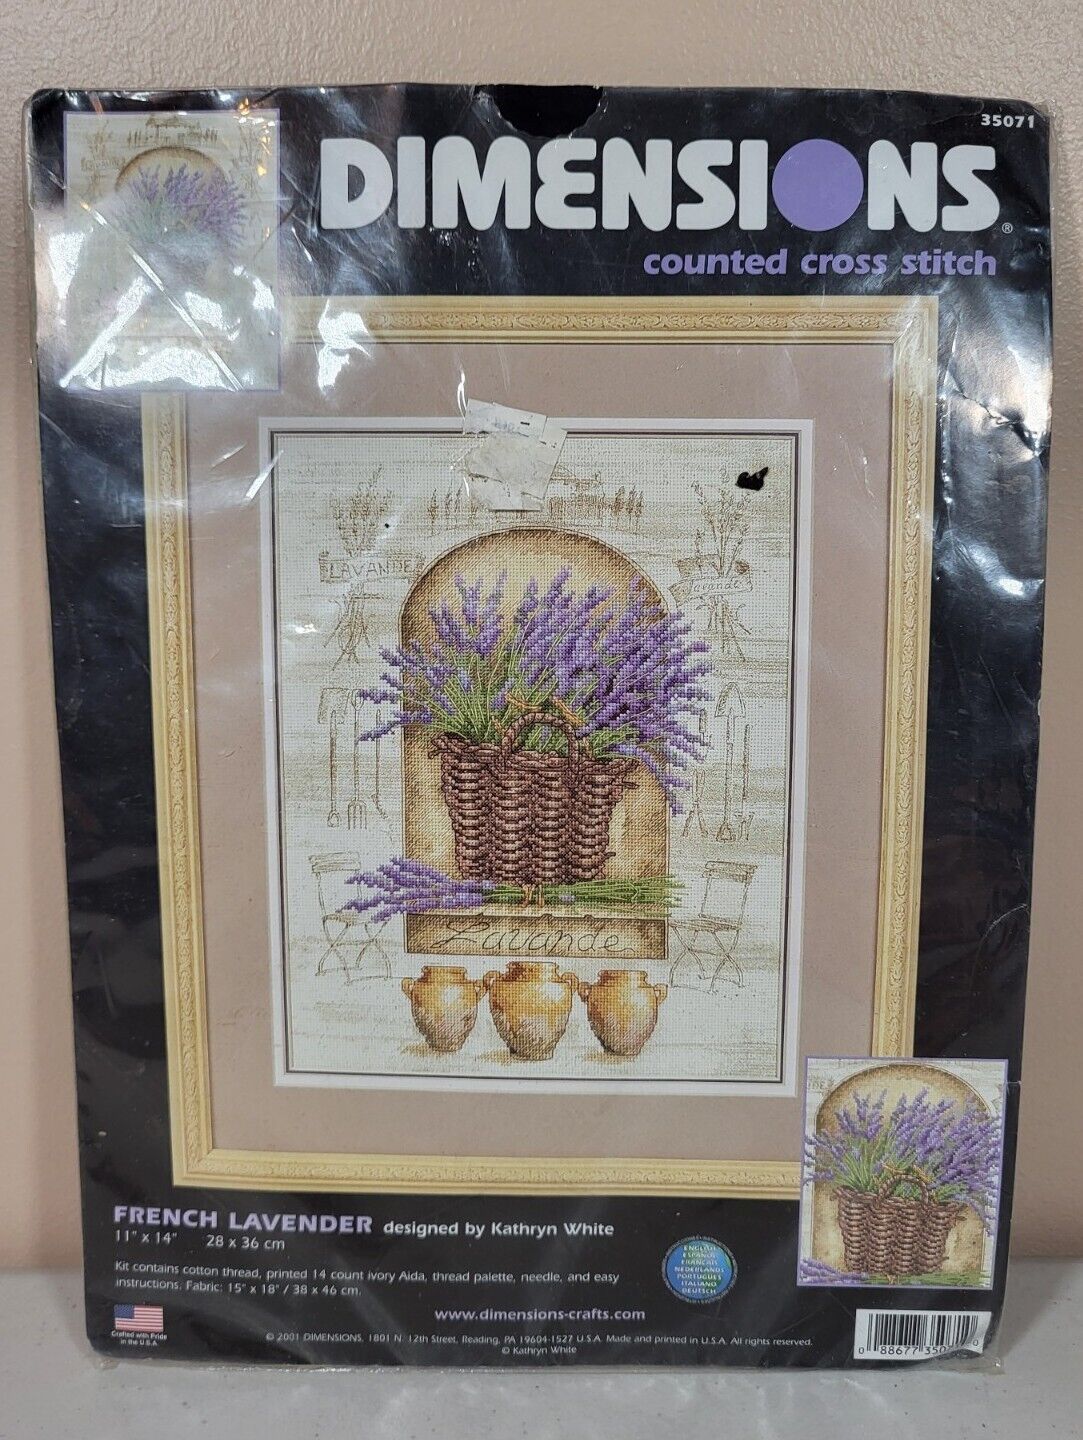 Dimensions Counted Cross Stitch Kit #35071 French Lavender